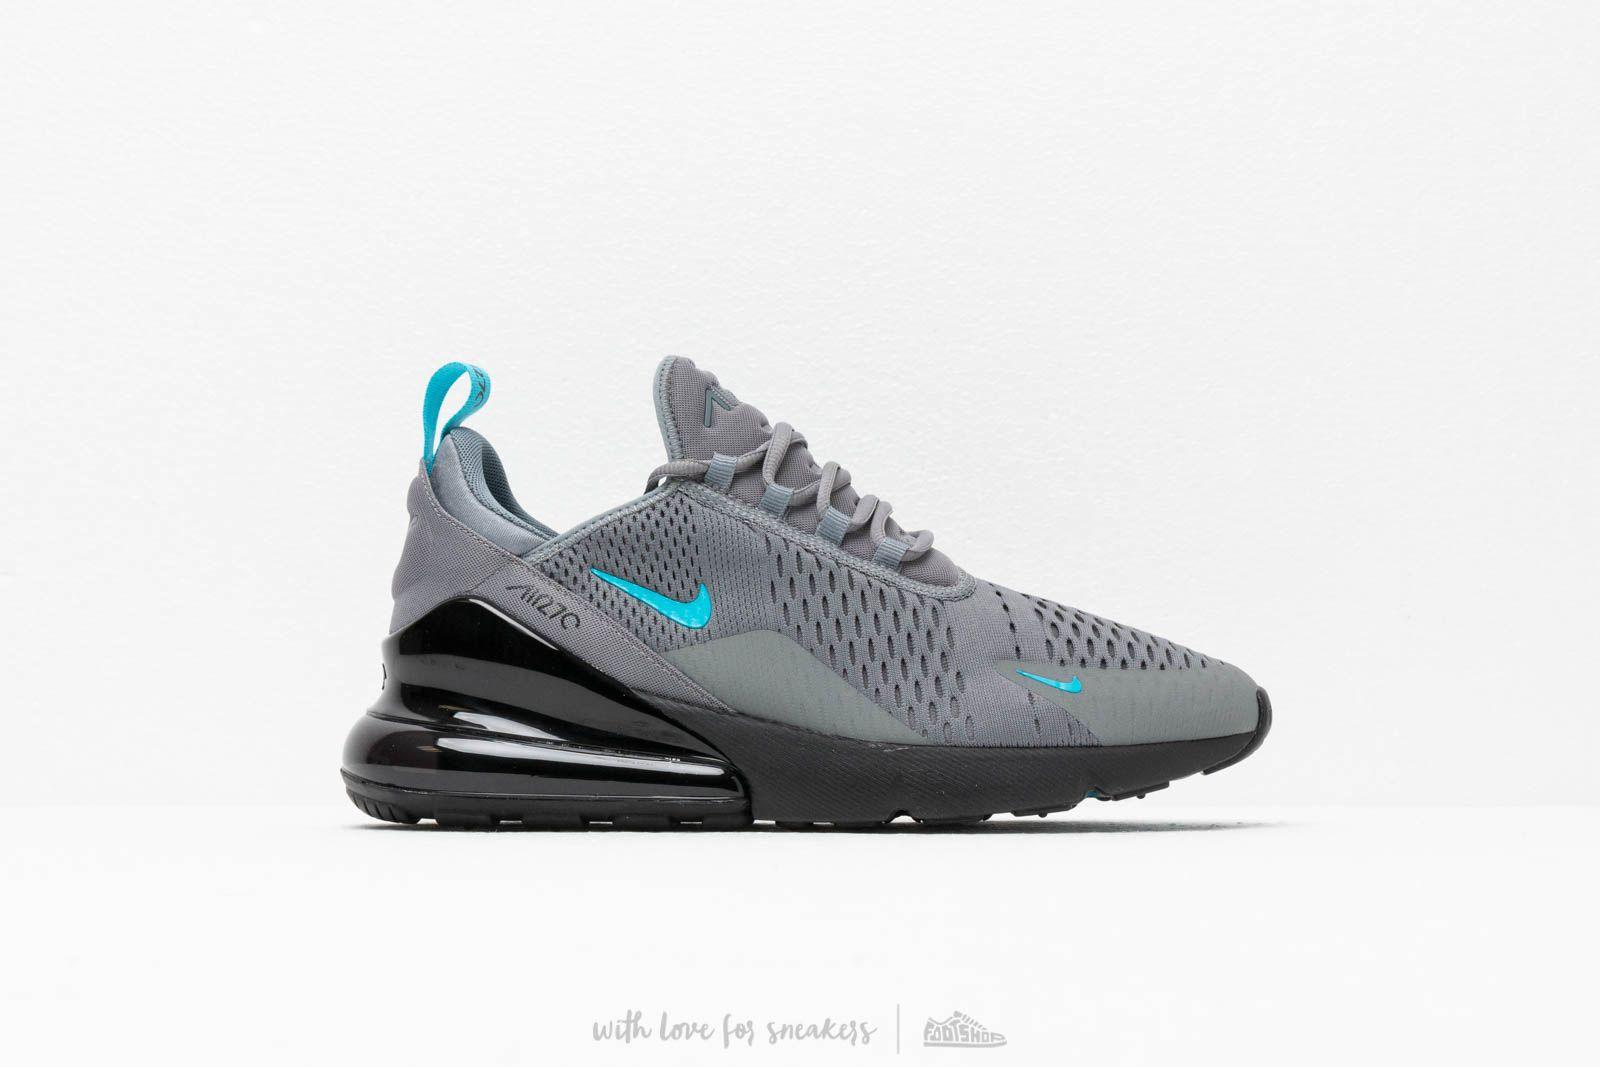 Nike Rubber Air Max 270 Cool Grey/ Blue Fury for Men - Lyst